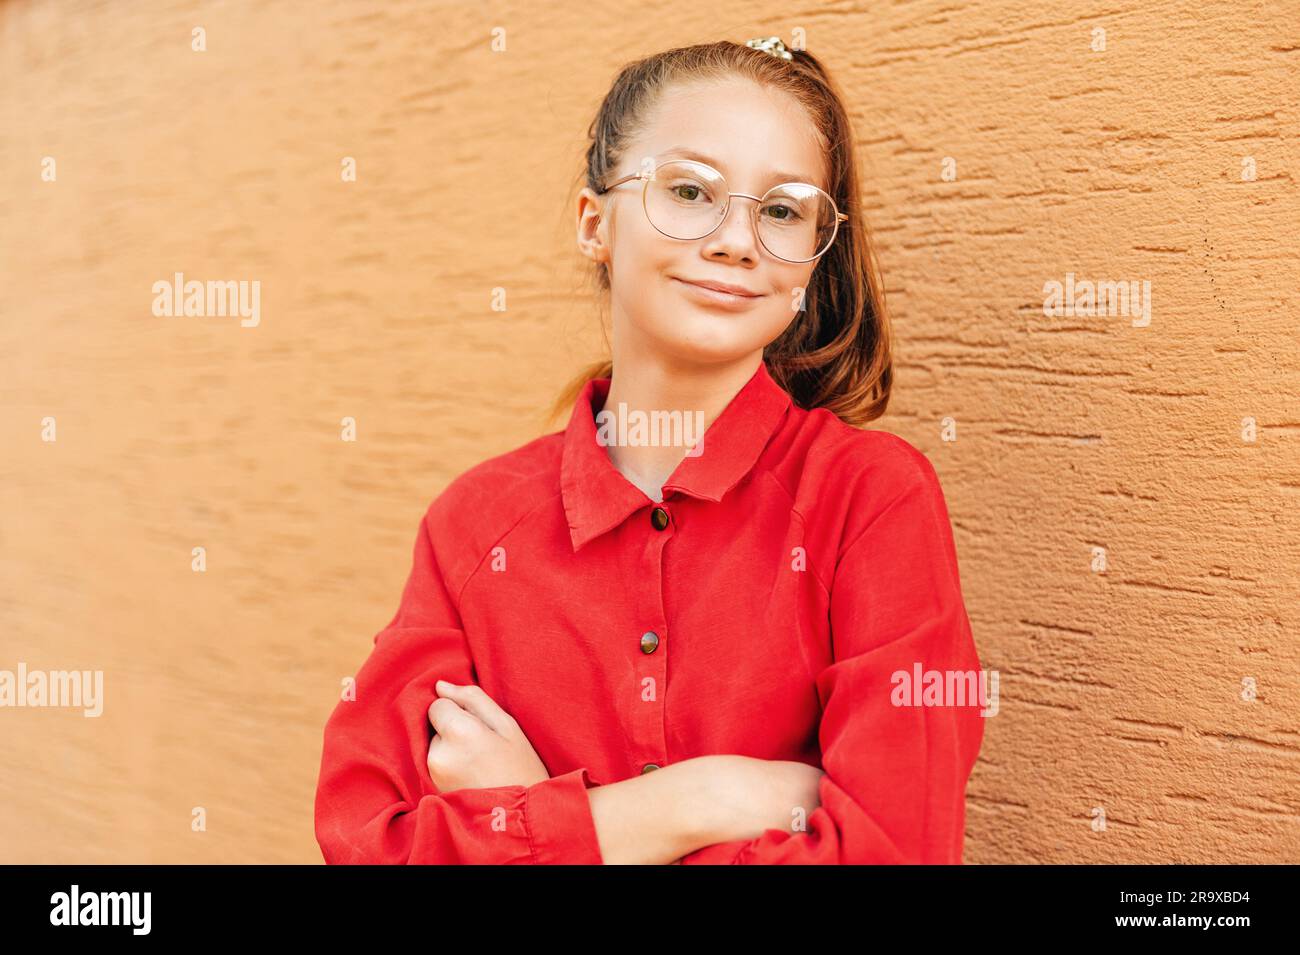 Outdoor portrait of cute preteen girl wearing red dress and eyeglasses, posing against orange wall Stock Photo